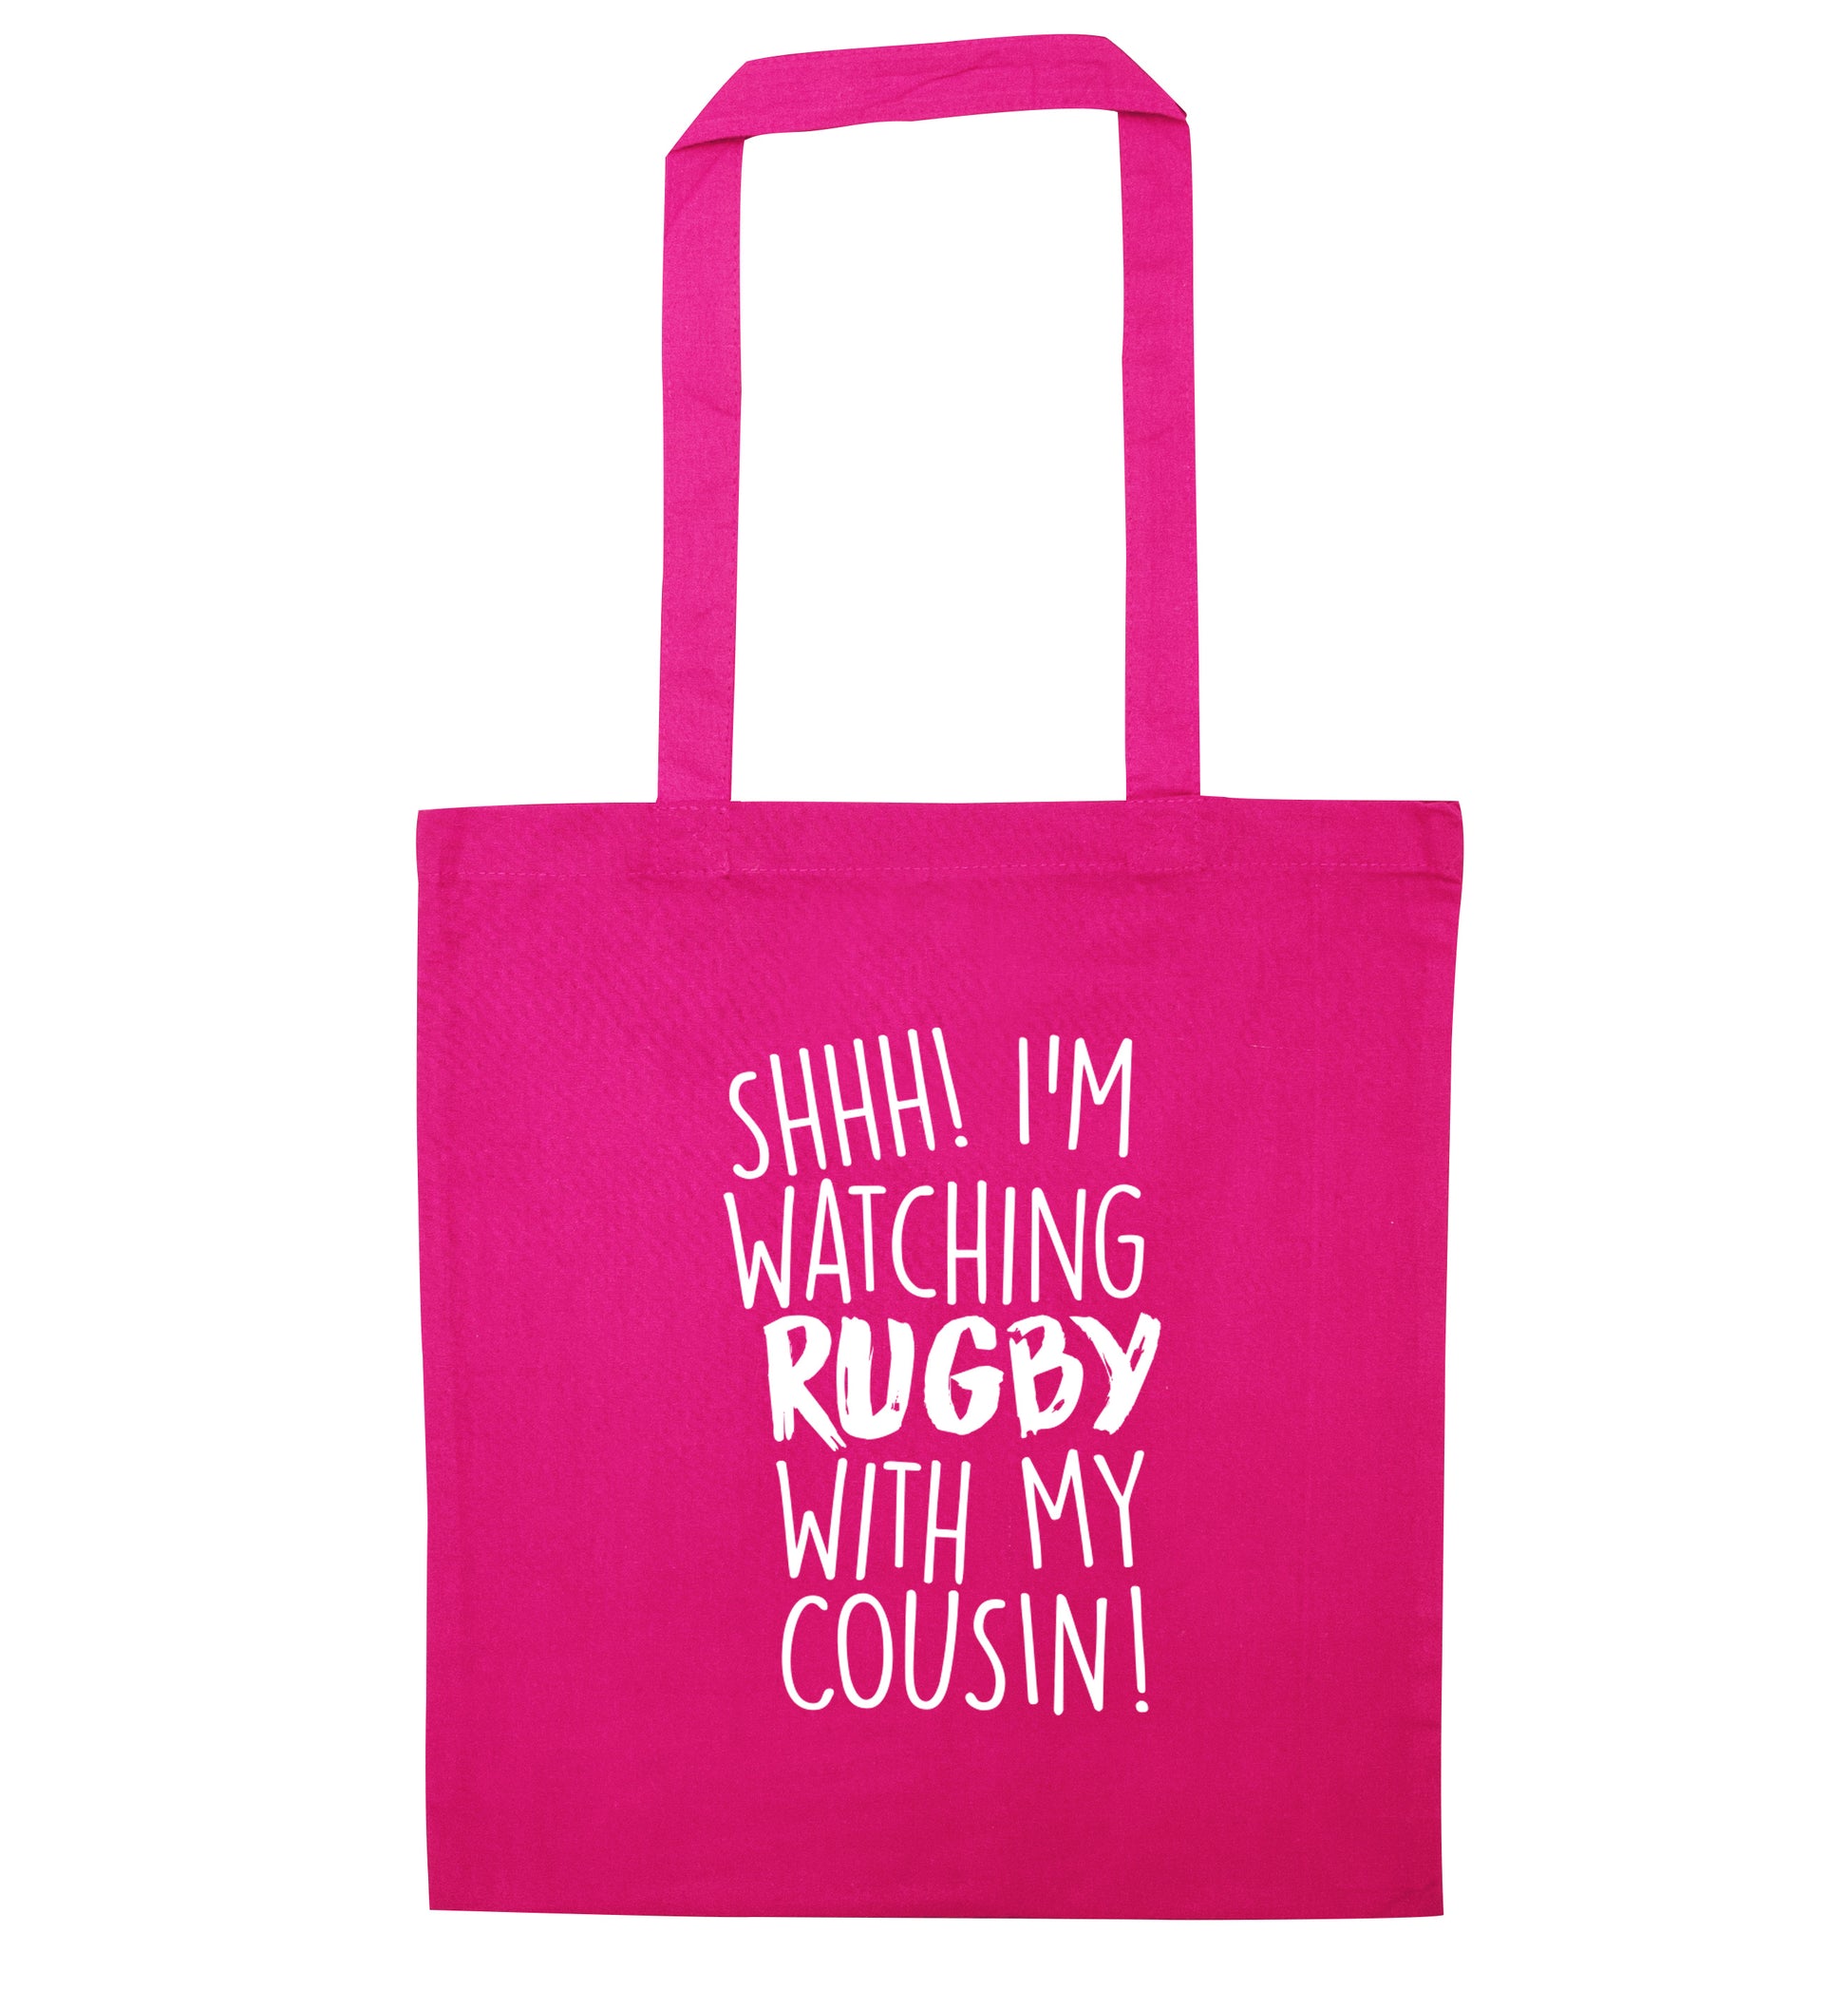 Shhh I'm watching rugby with my cousin pink tote bag